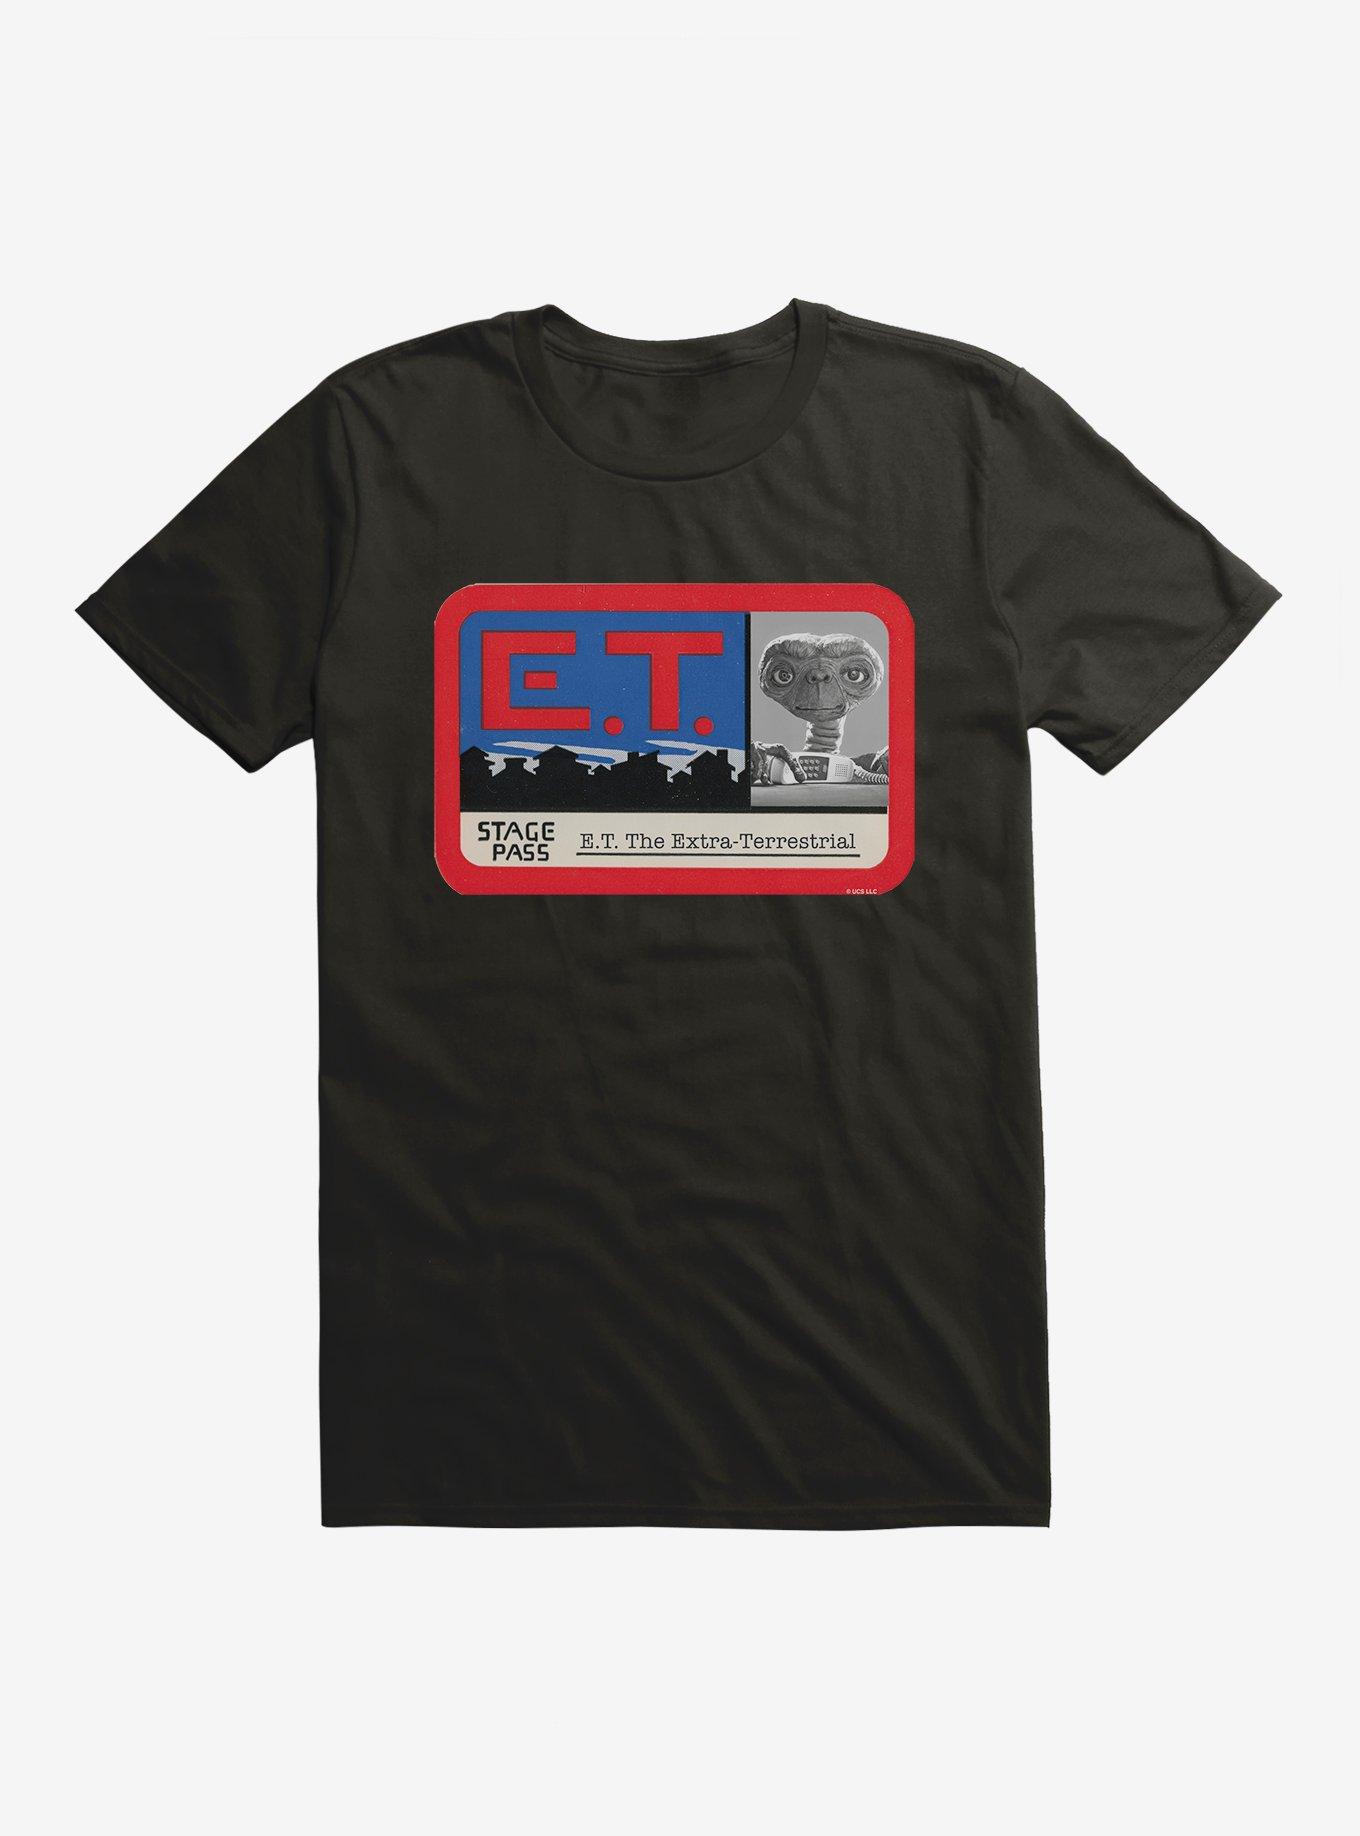 E.T. 40th Anniversary Stage Pass T-Shirt